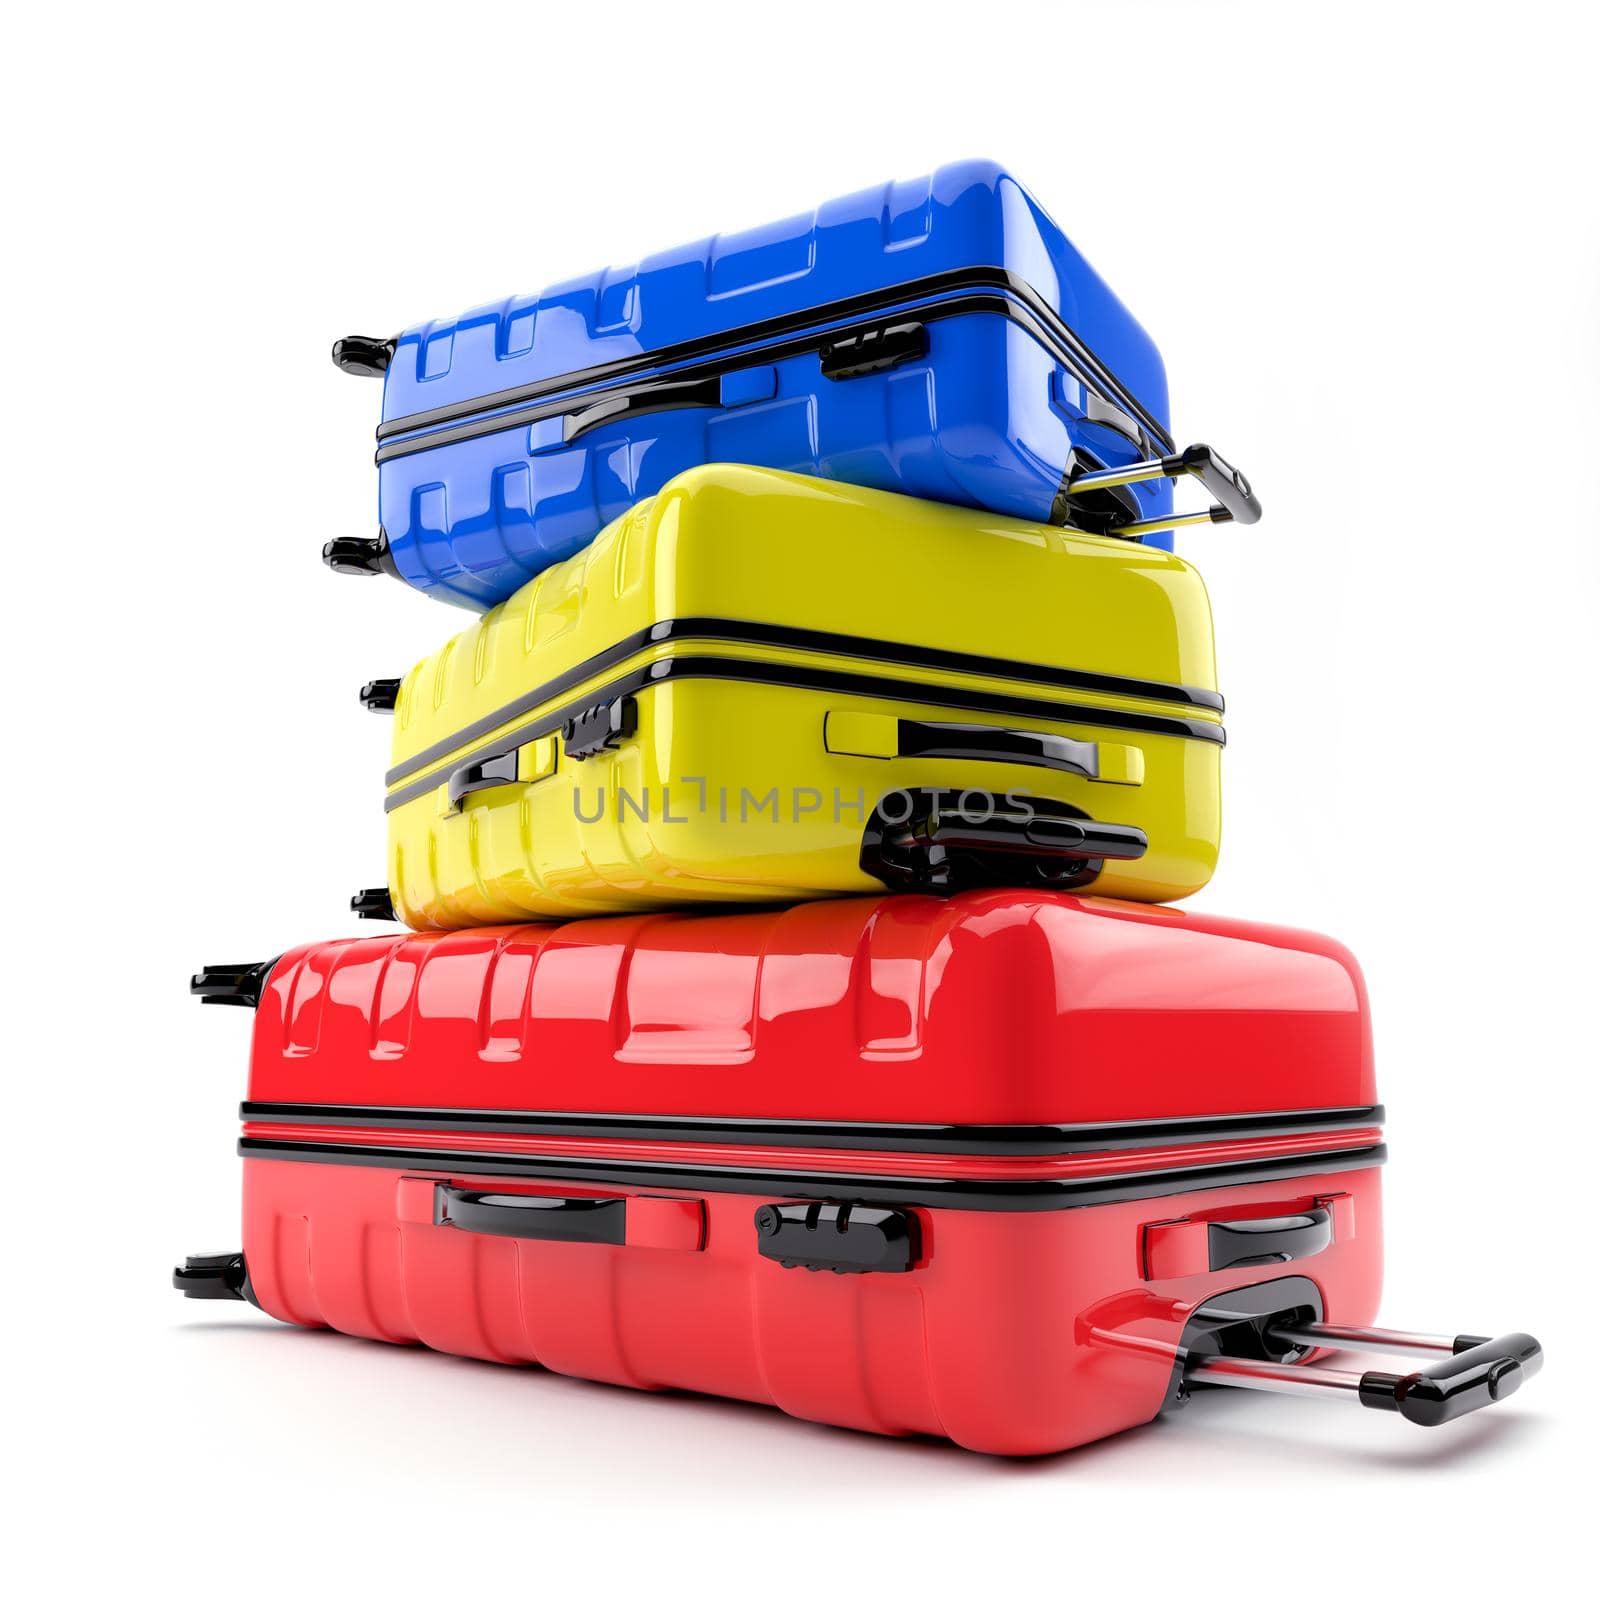 A stack of colorful suitcases, 3D rendering illustration.